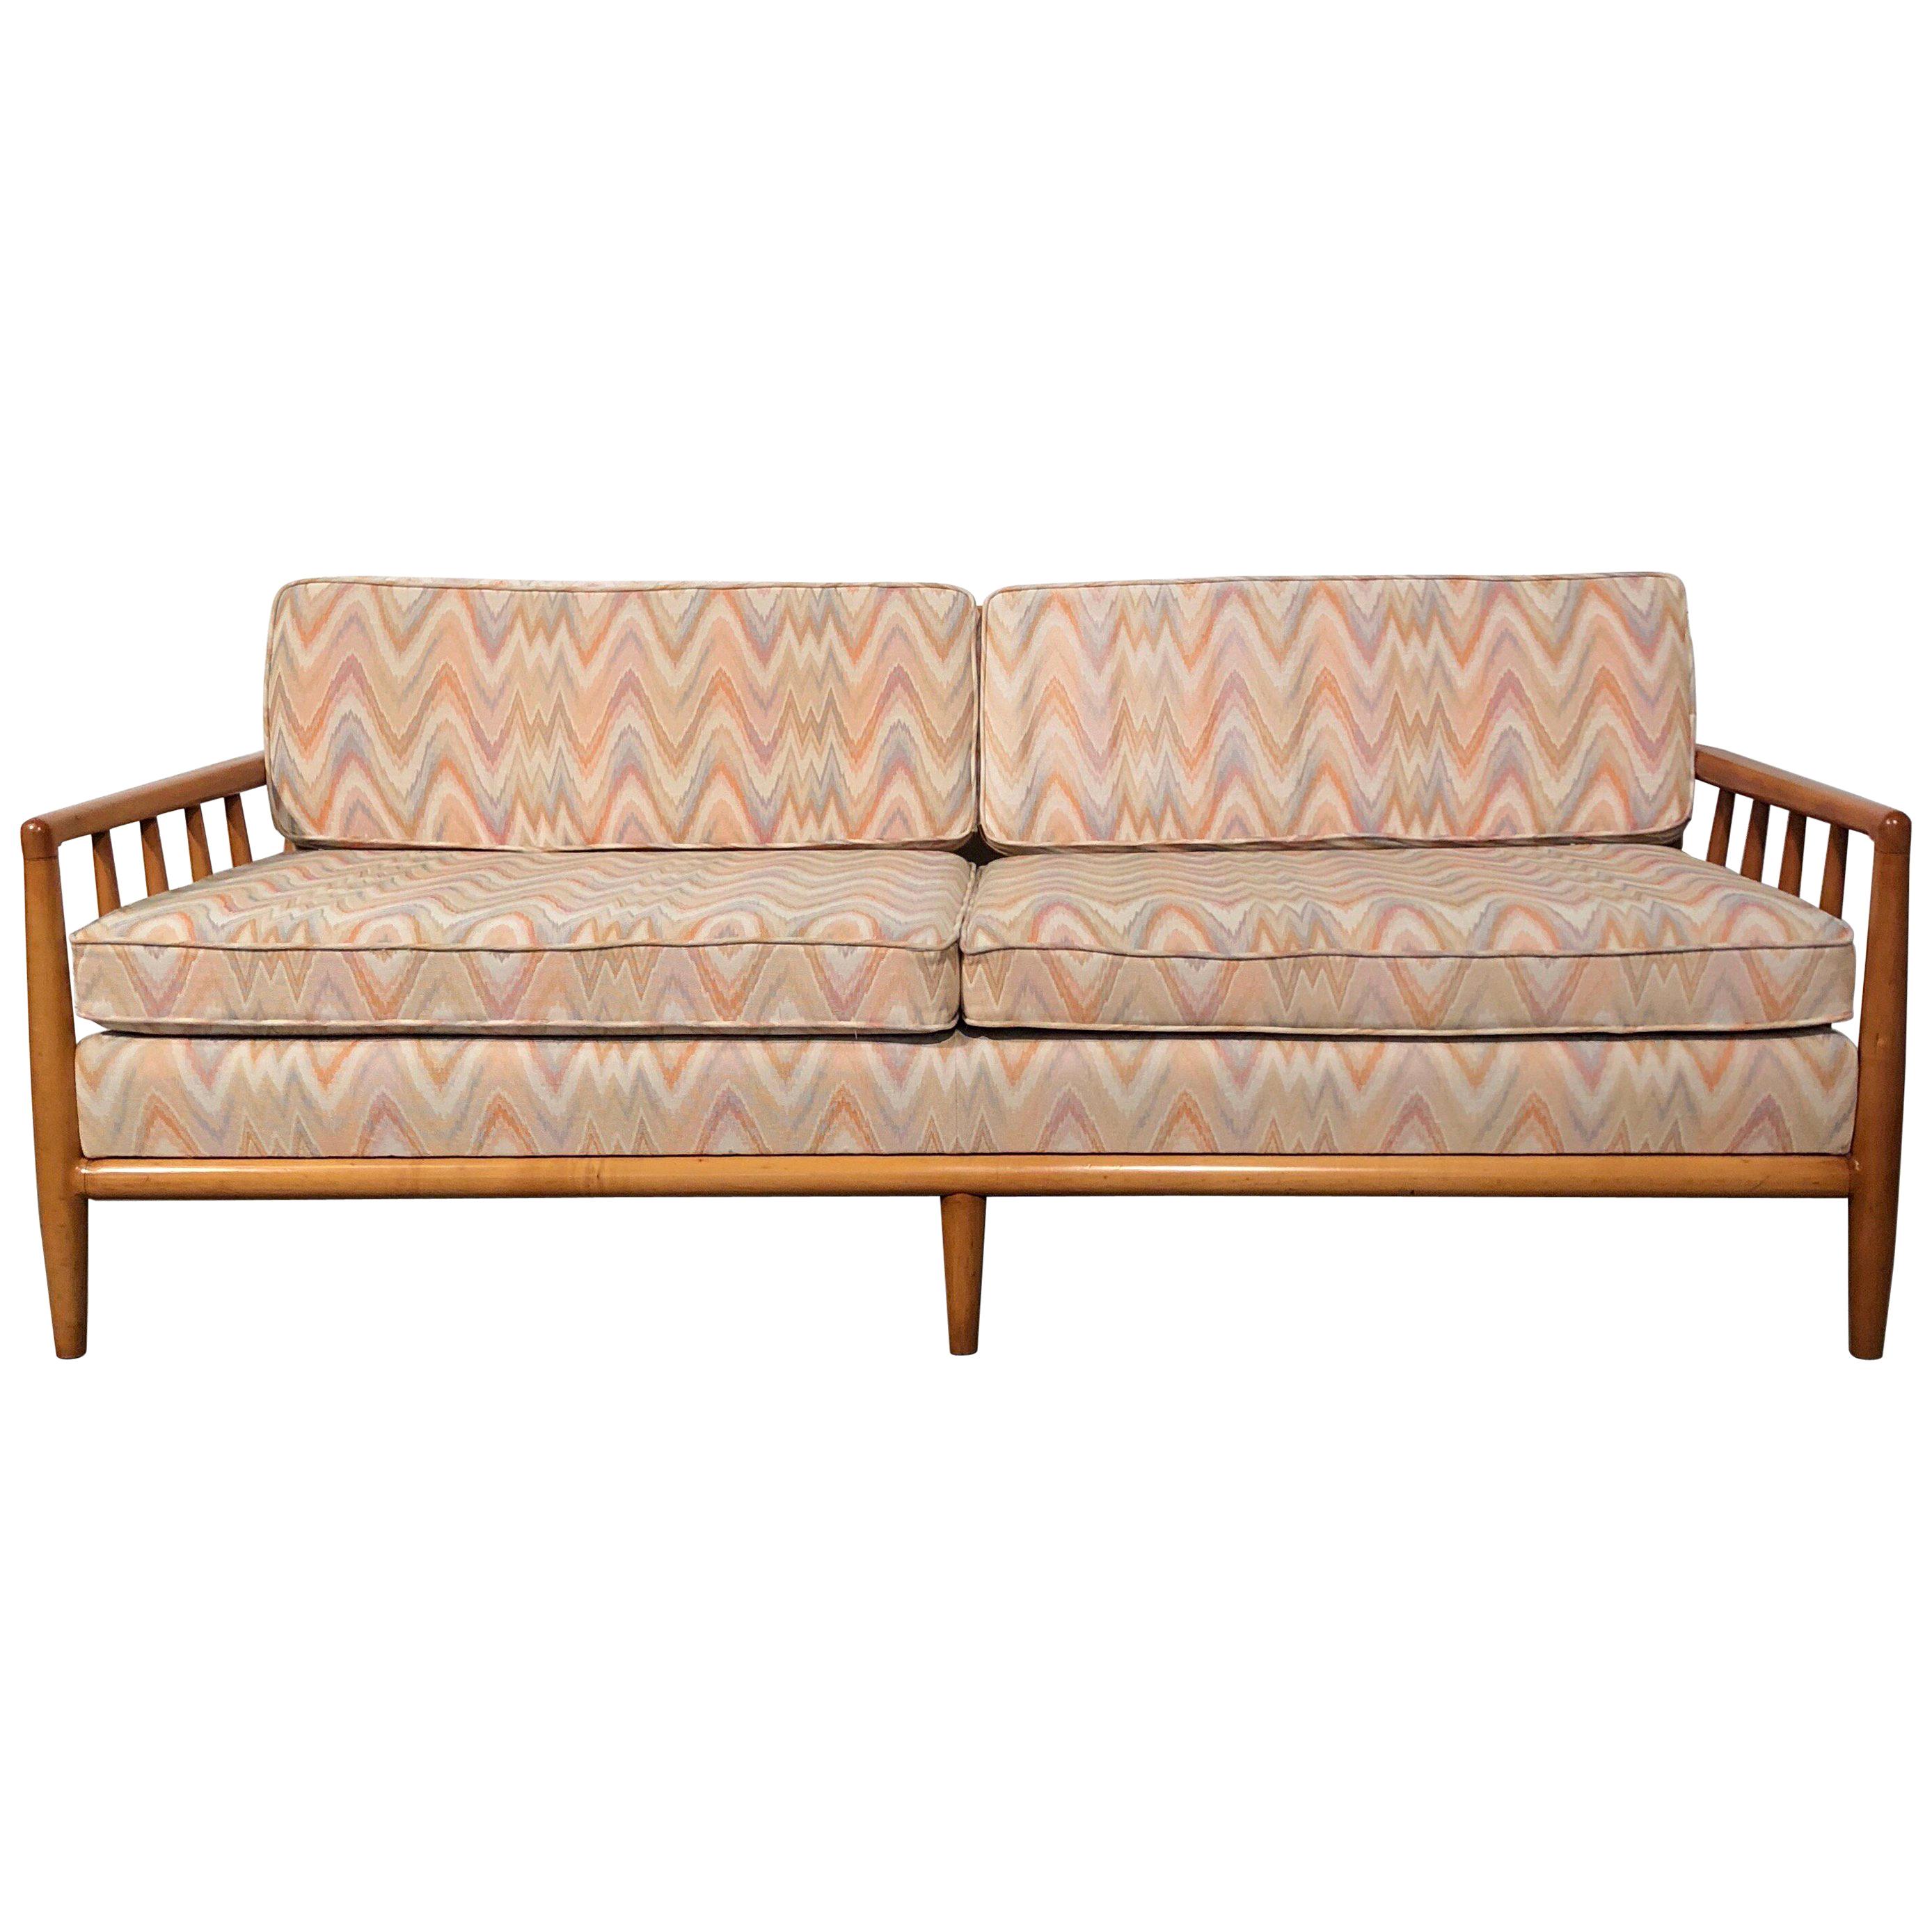 Mid-Century Modern Spindled Sofa in Vintage Flamestitch Fabric For Sale